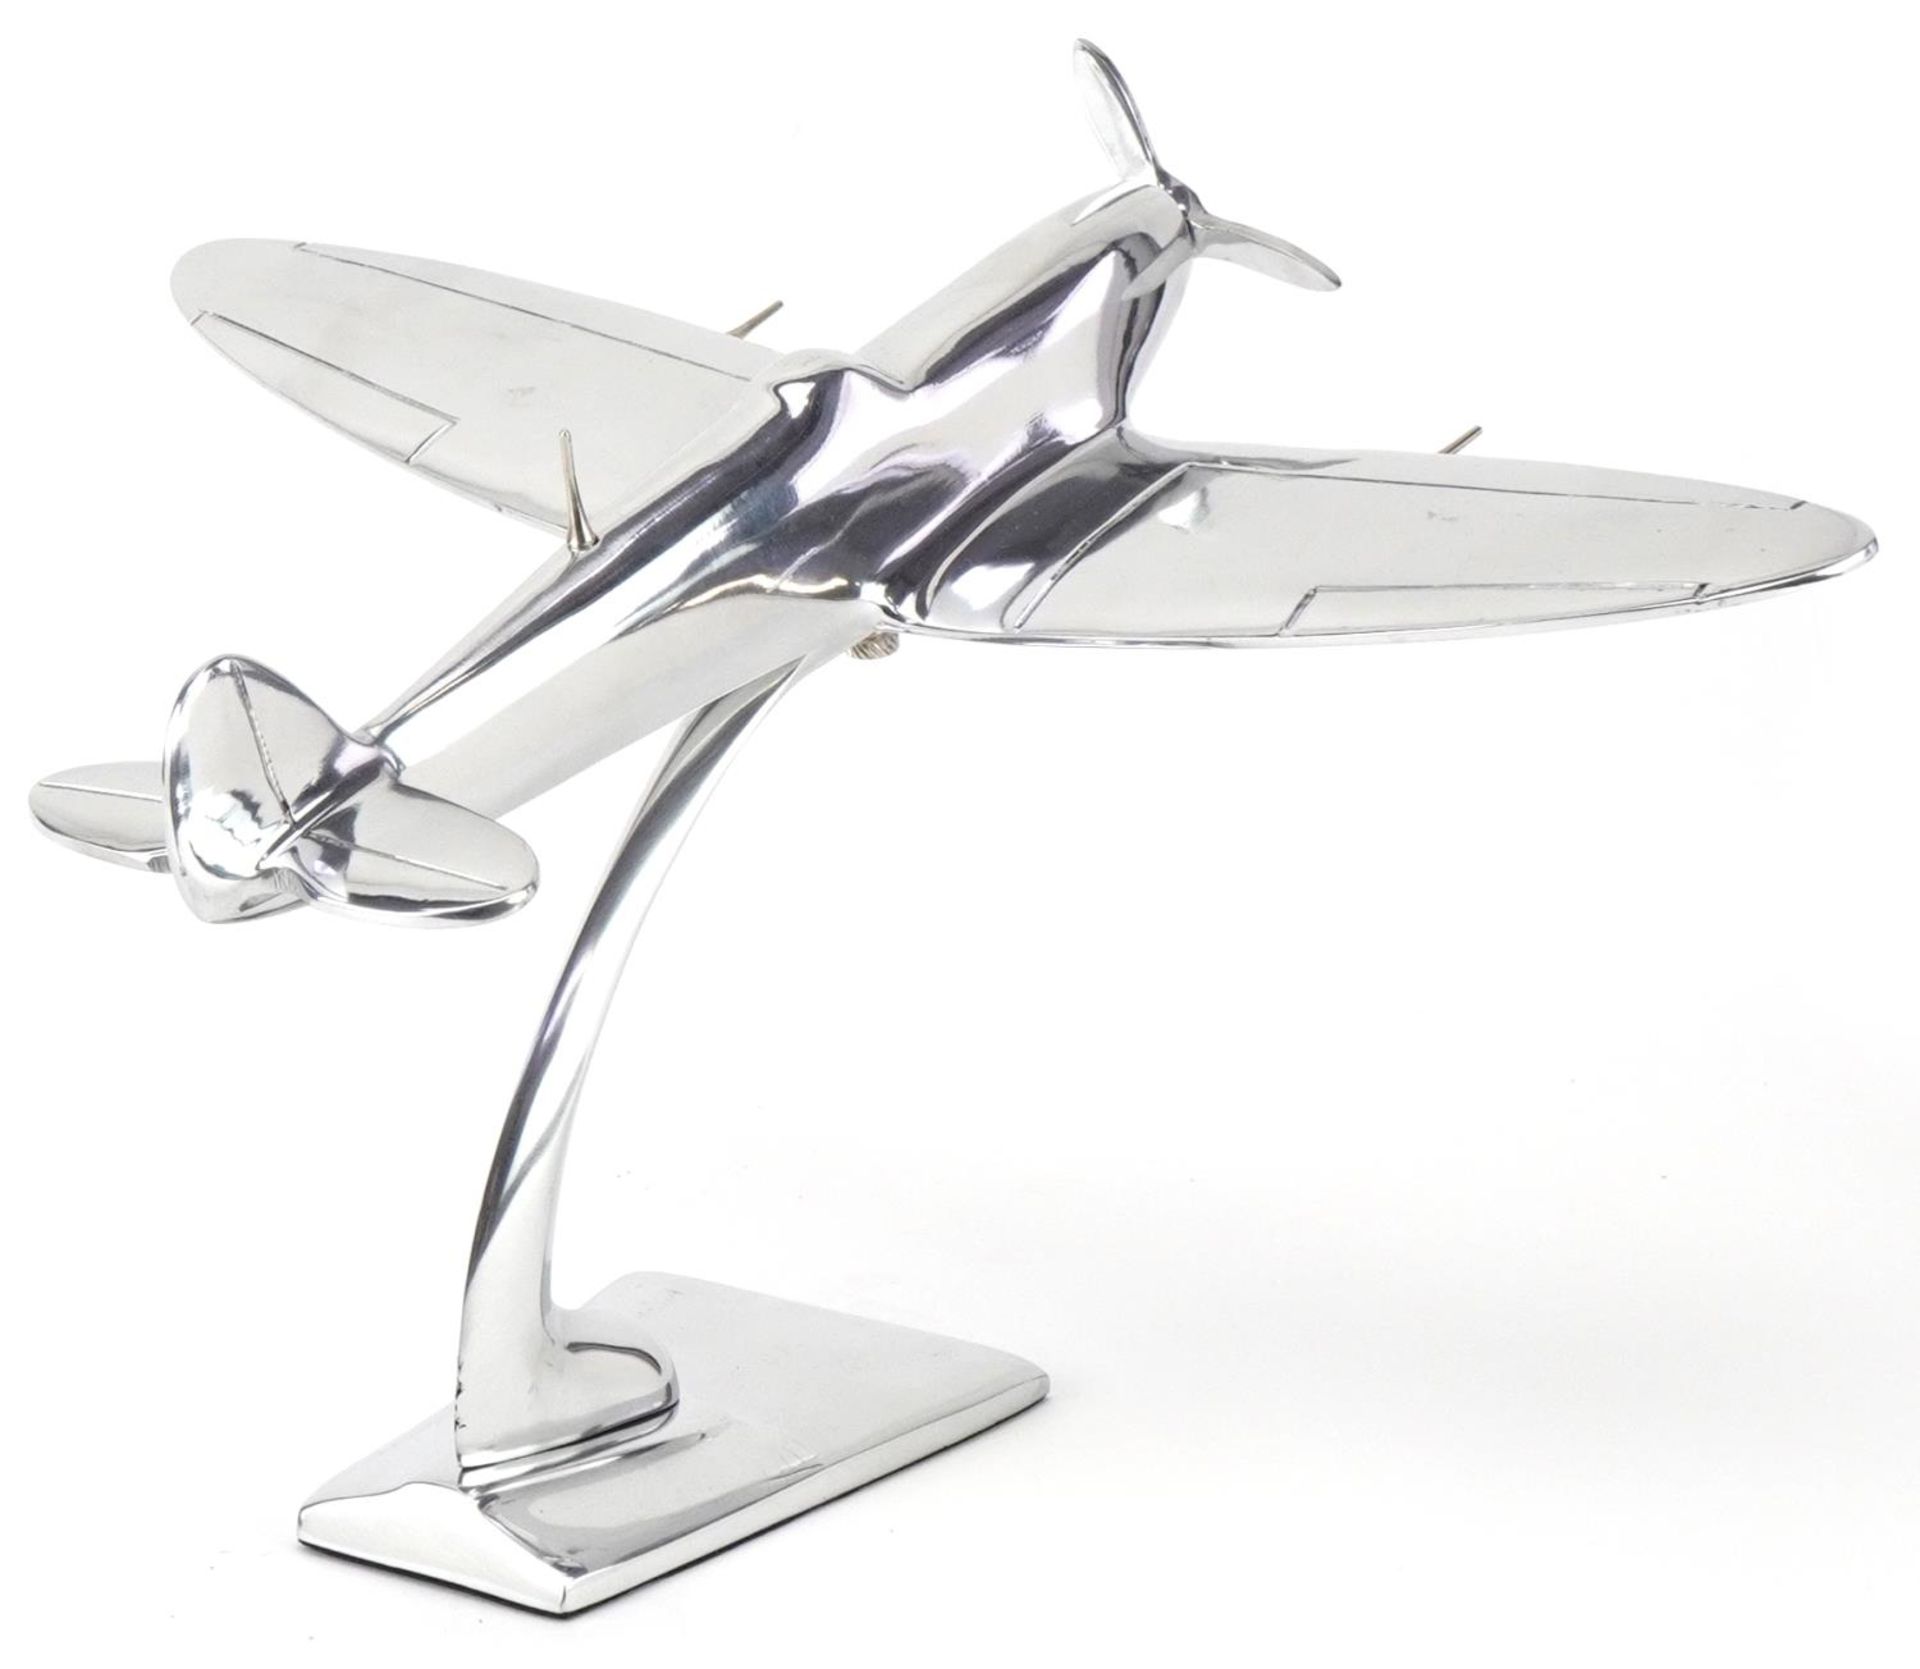 Chromed model of a military aeroplane, 36cm wide - Image 2 of 3